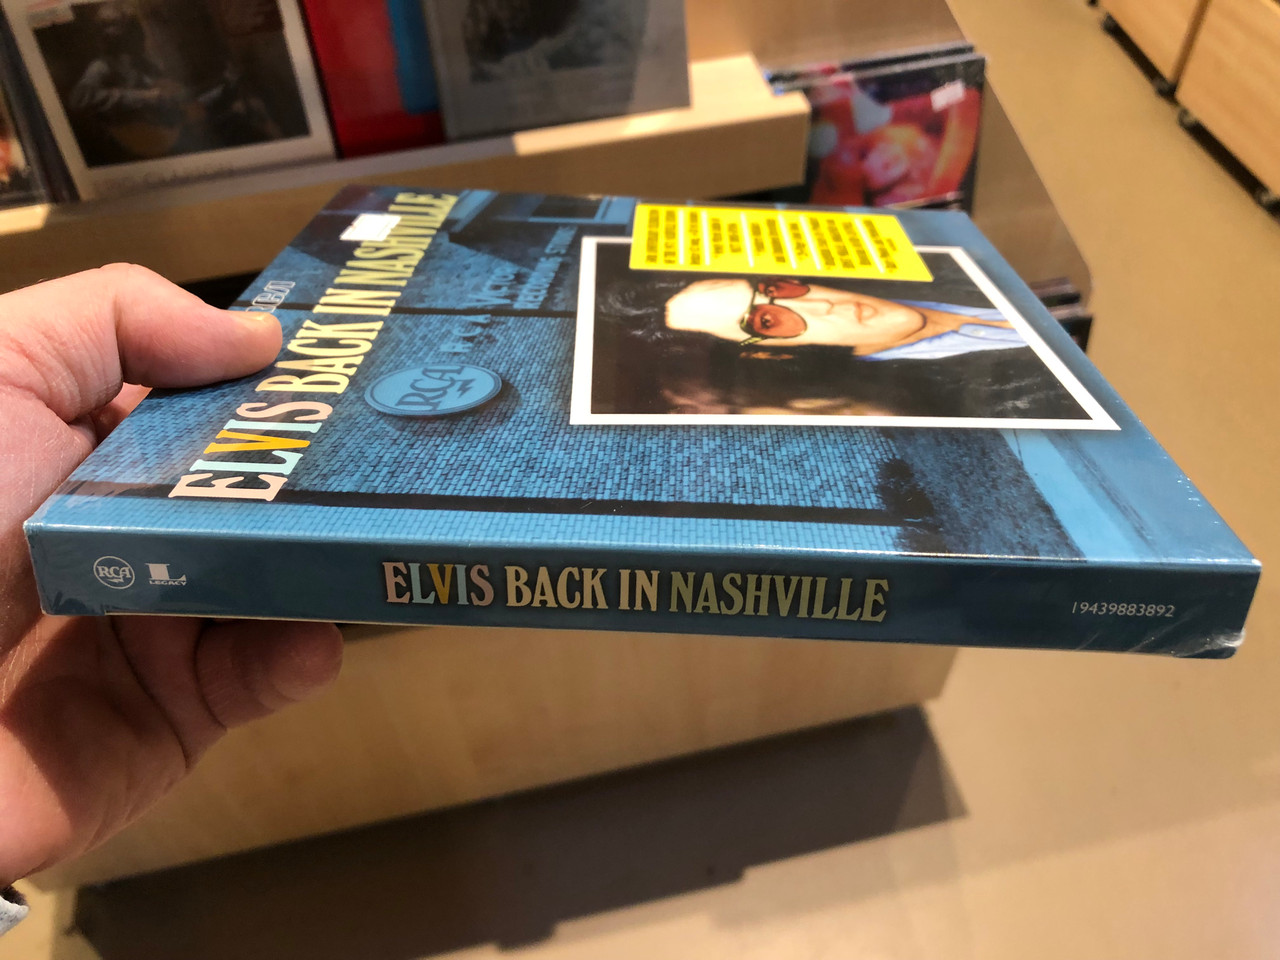 https://cdn10.bigcommerce.com/s-62bdpkt7pb/products/0/images/219929/Elvis_Back_In_Nashville_50th_anniversary_celebration_of_the_1971_nashville_sessions_Deluxe_82_song_4-CD_includes_Newly_Mixed_Audio_By_Matt_Ross-Spang_Features_Outtakes_and_Undubbed_Re_3__55957.1648704106.1280.1280.JPG?c=2&_gl=1*9ahbex*_ga*MjA2NTIxMjE2MC4xNTkwNTEyNTMy*_ga_WS2VZYPC6G*MTY0ODcwMjQ5OS4zMzguMS4xNjQ4NzAzNzYzLjM4